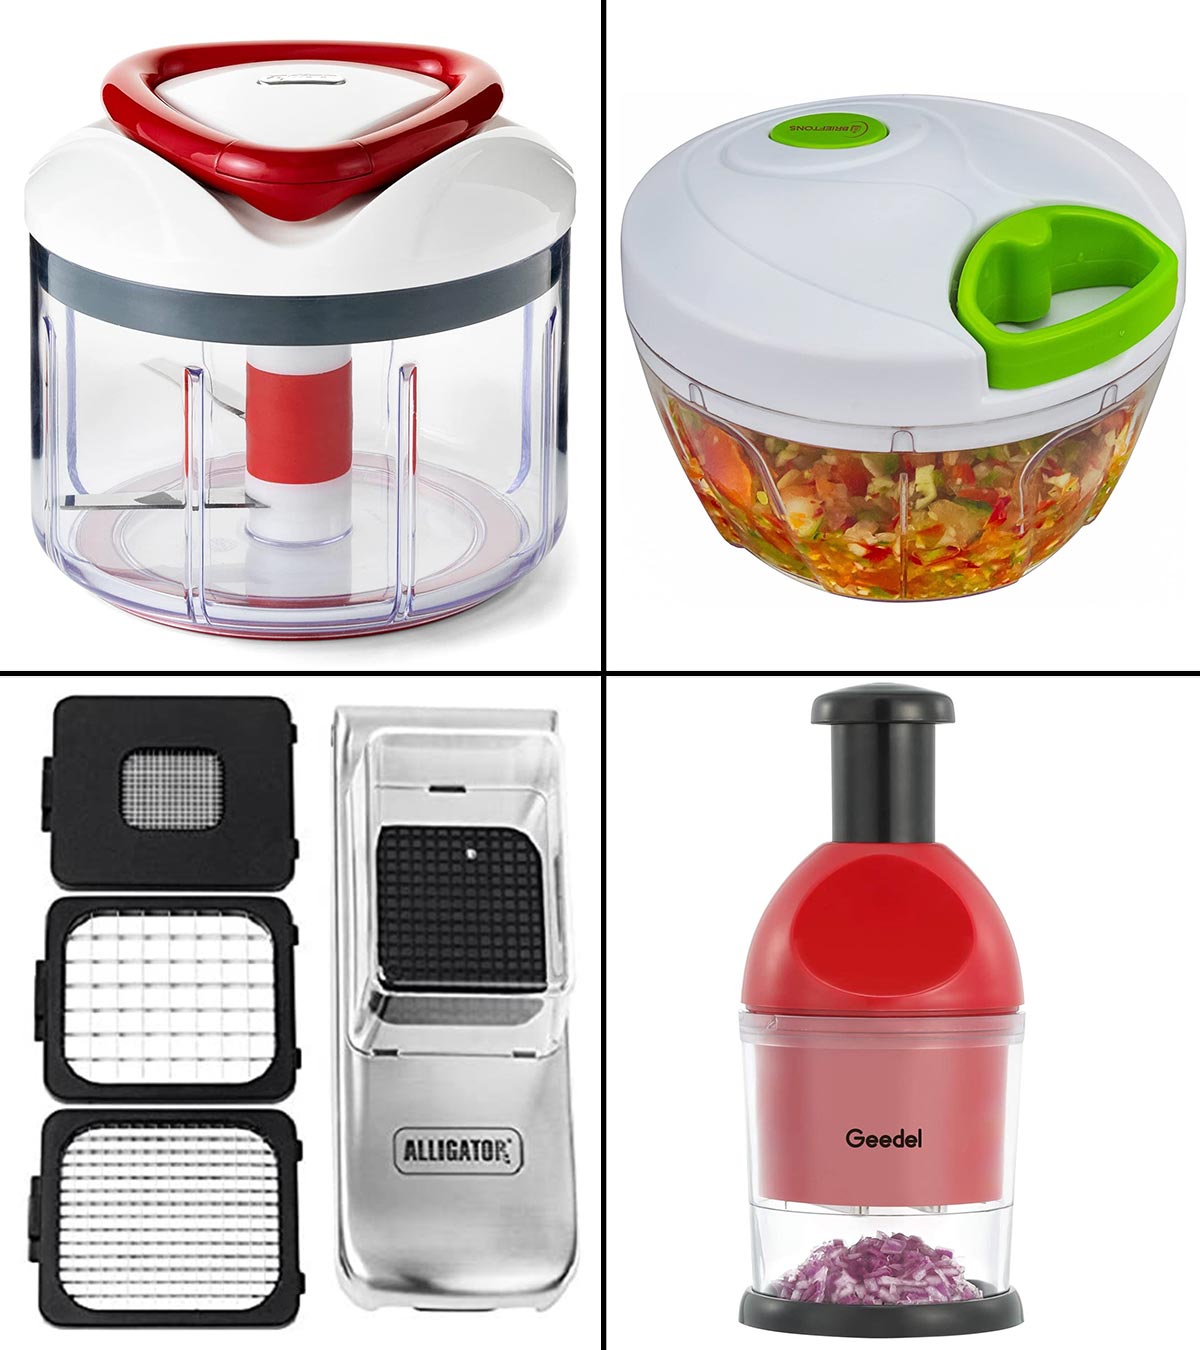 Make Meal Prep Faster with the Chop Wizard, Food & Nutrition